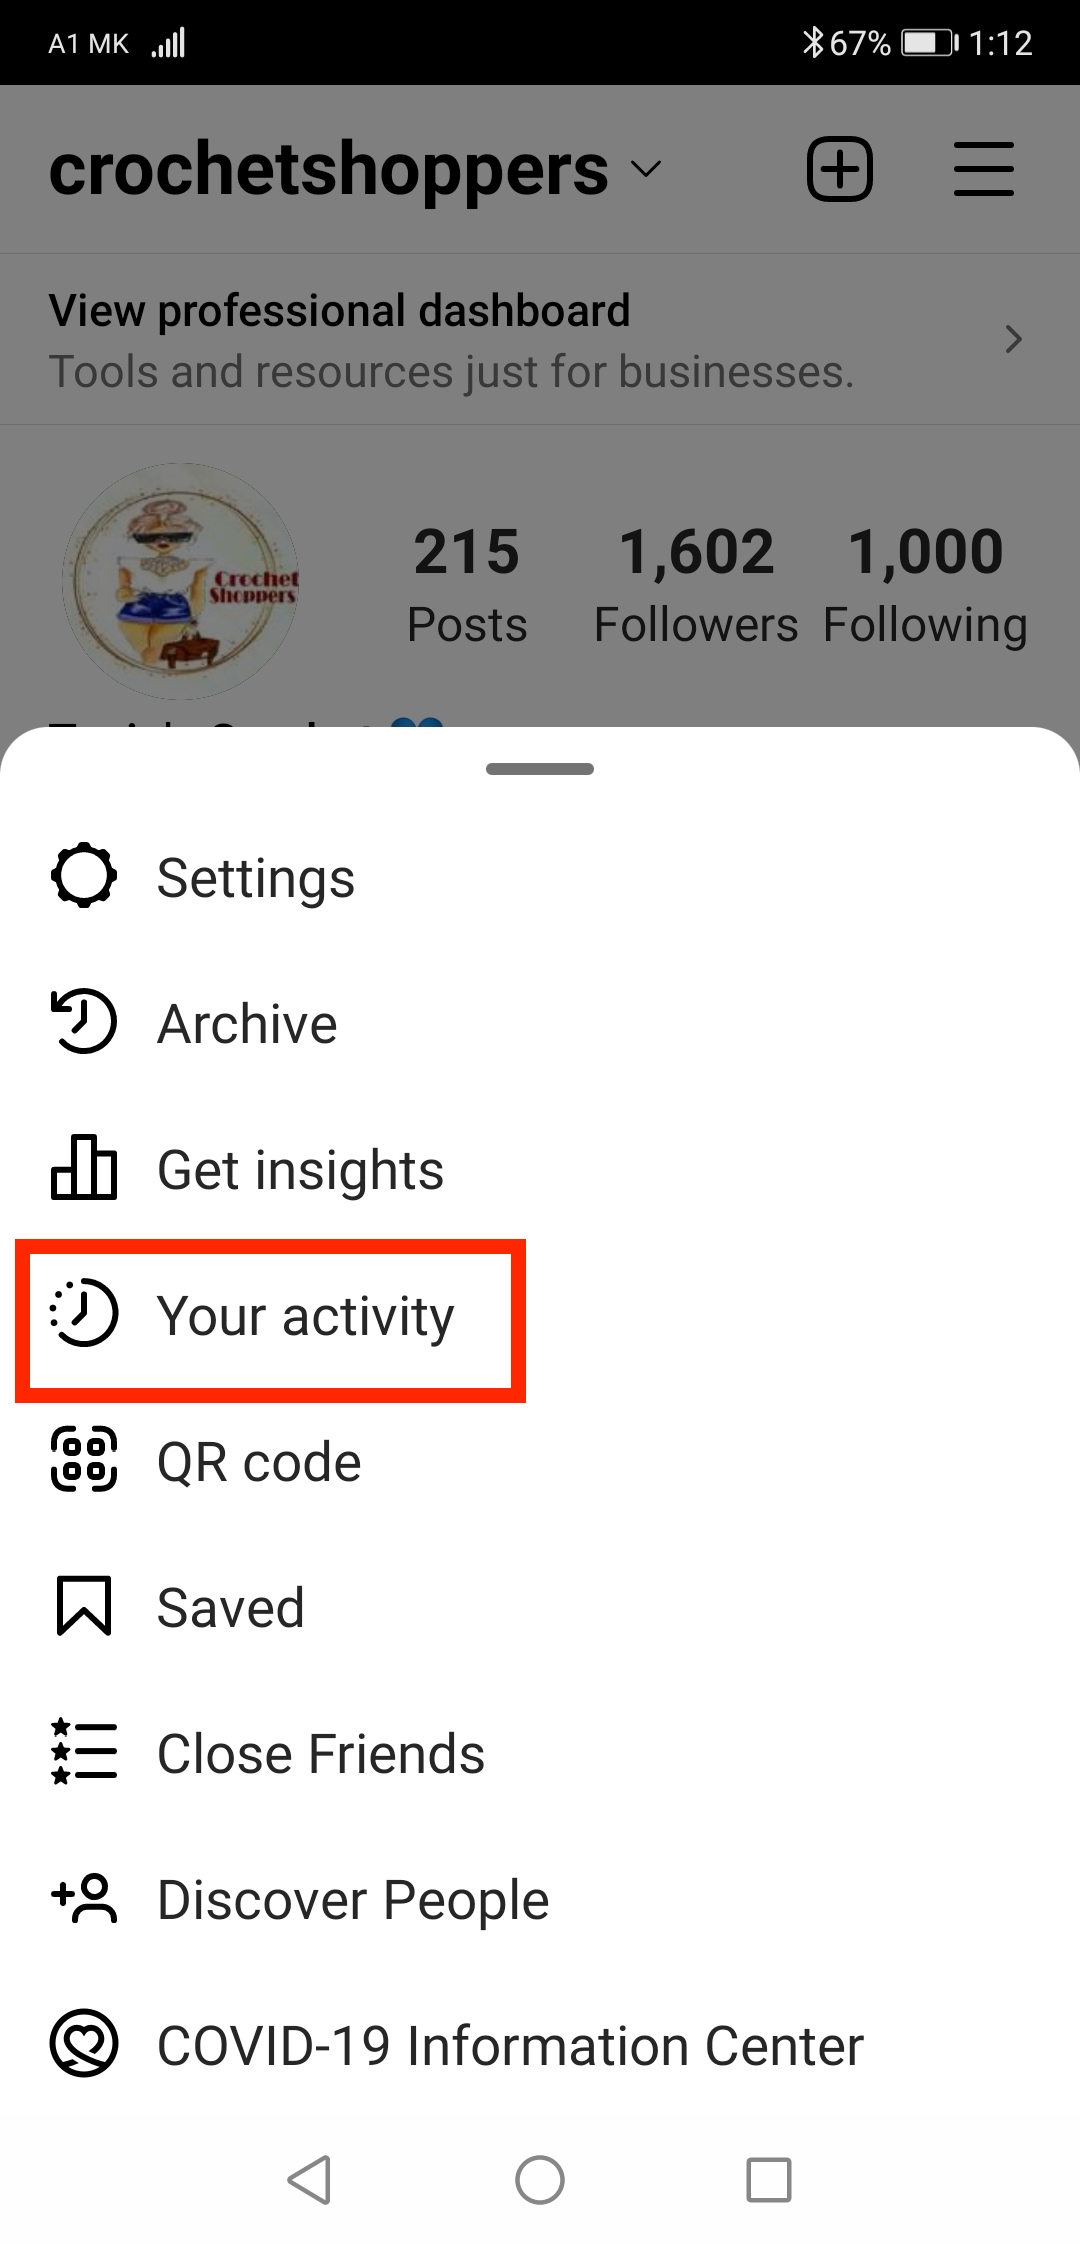 Select 'Your Activity'